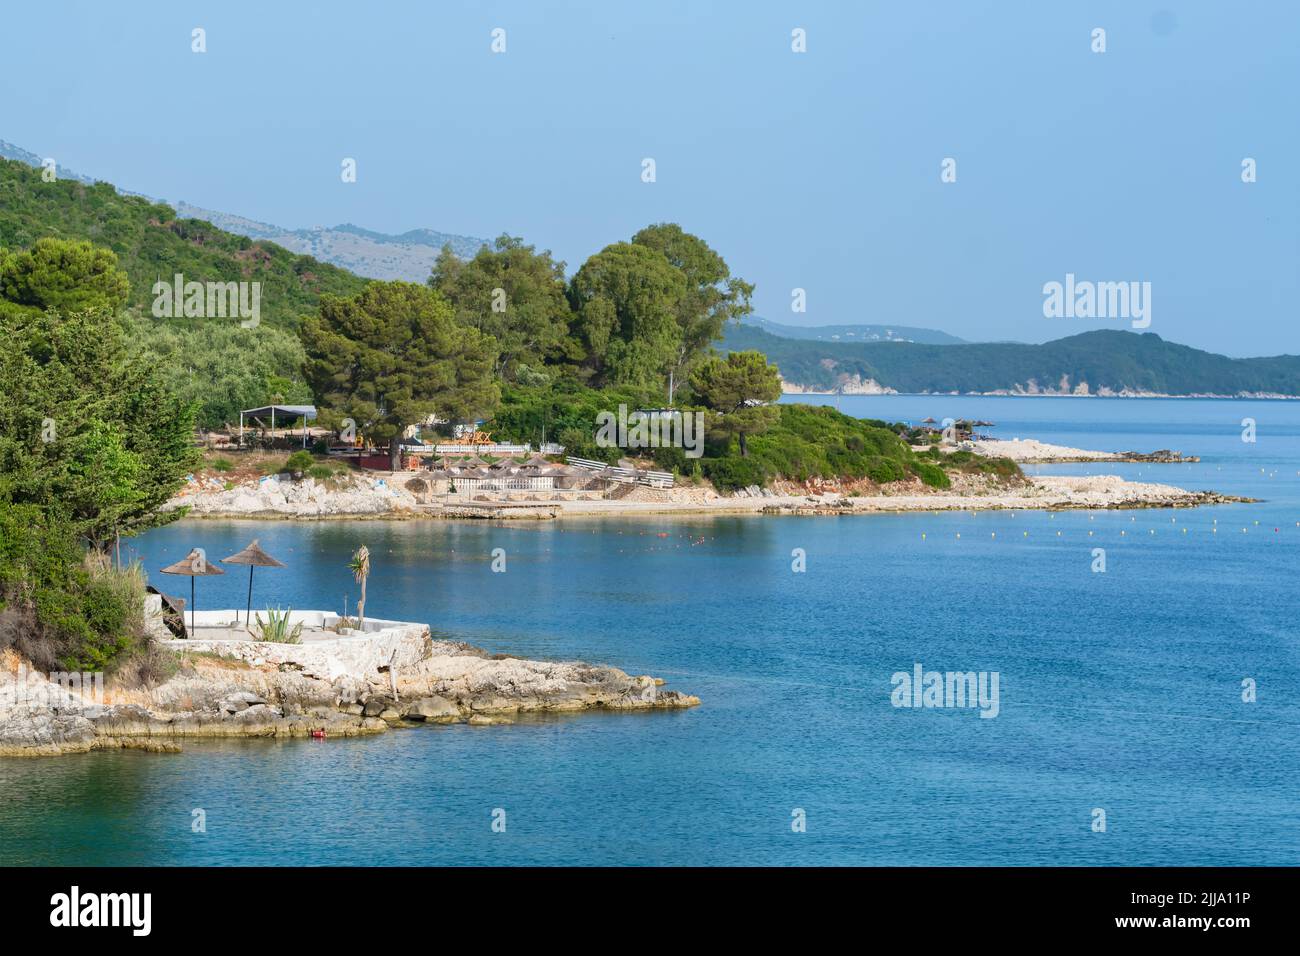 Beautiful landscape of the Ksamil waterfront in summer, Albania. Stock Photo